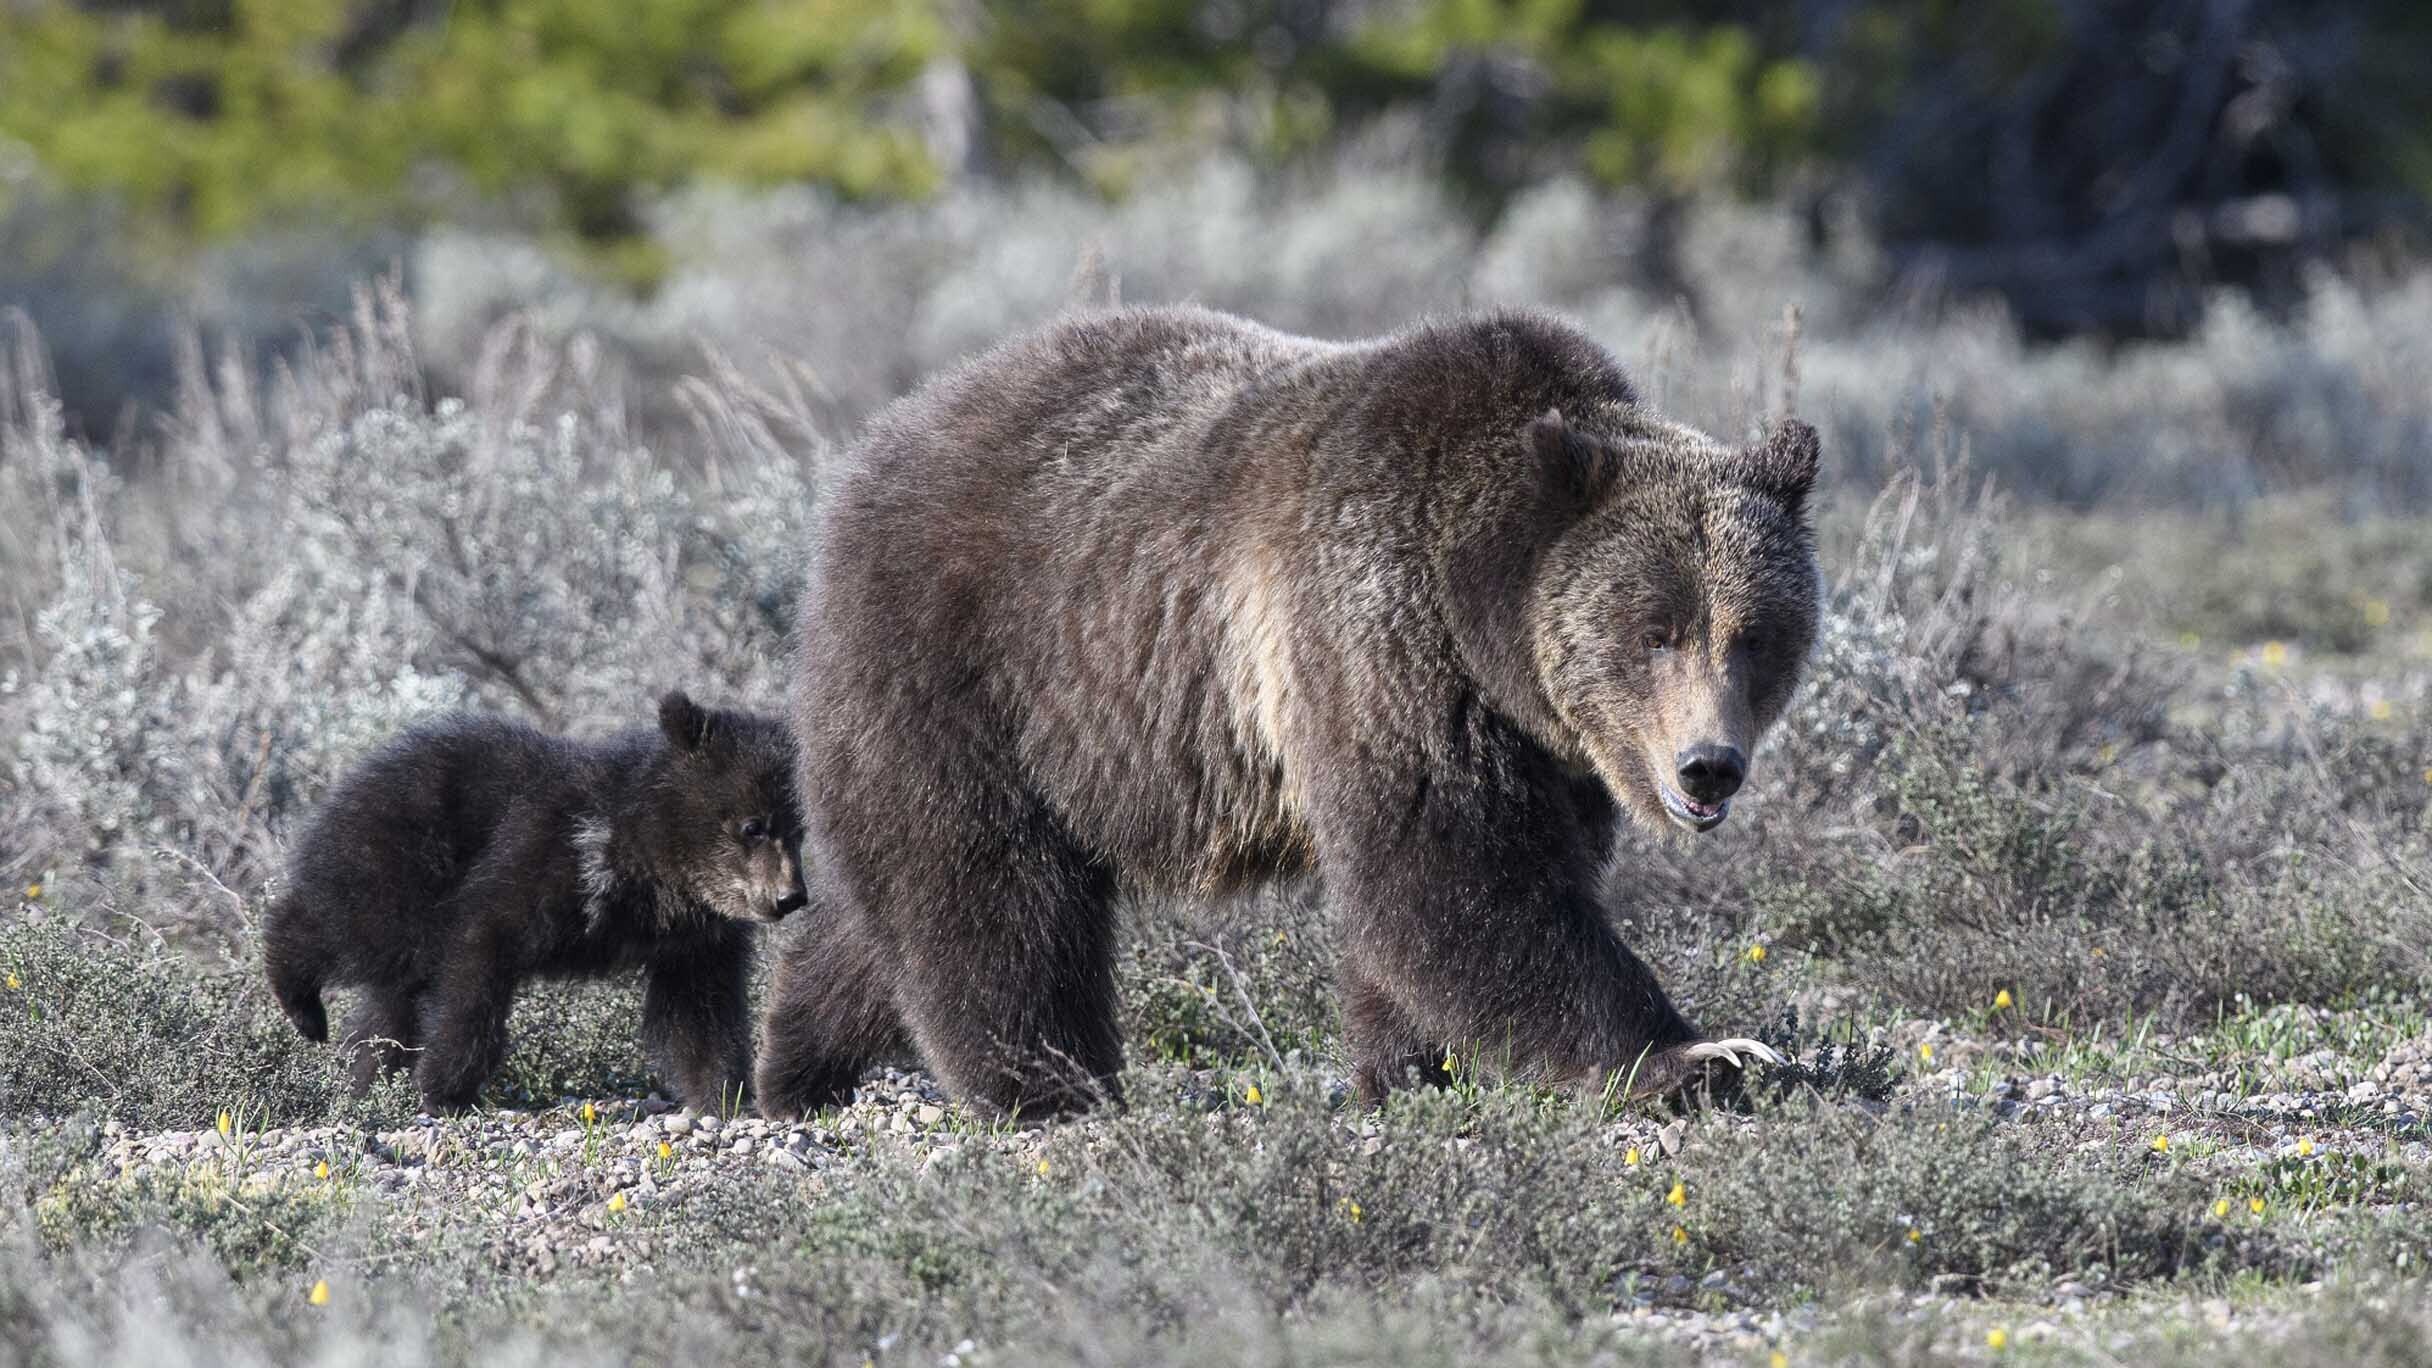 Don't Let Their Brawn Fool You, Wyoming Grizzlies Are Smarter Than Average  Bears